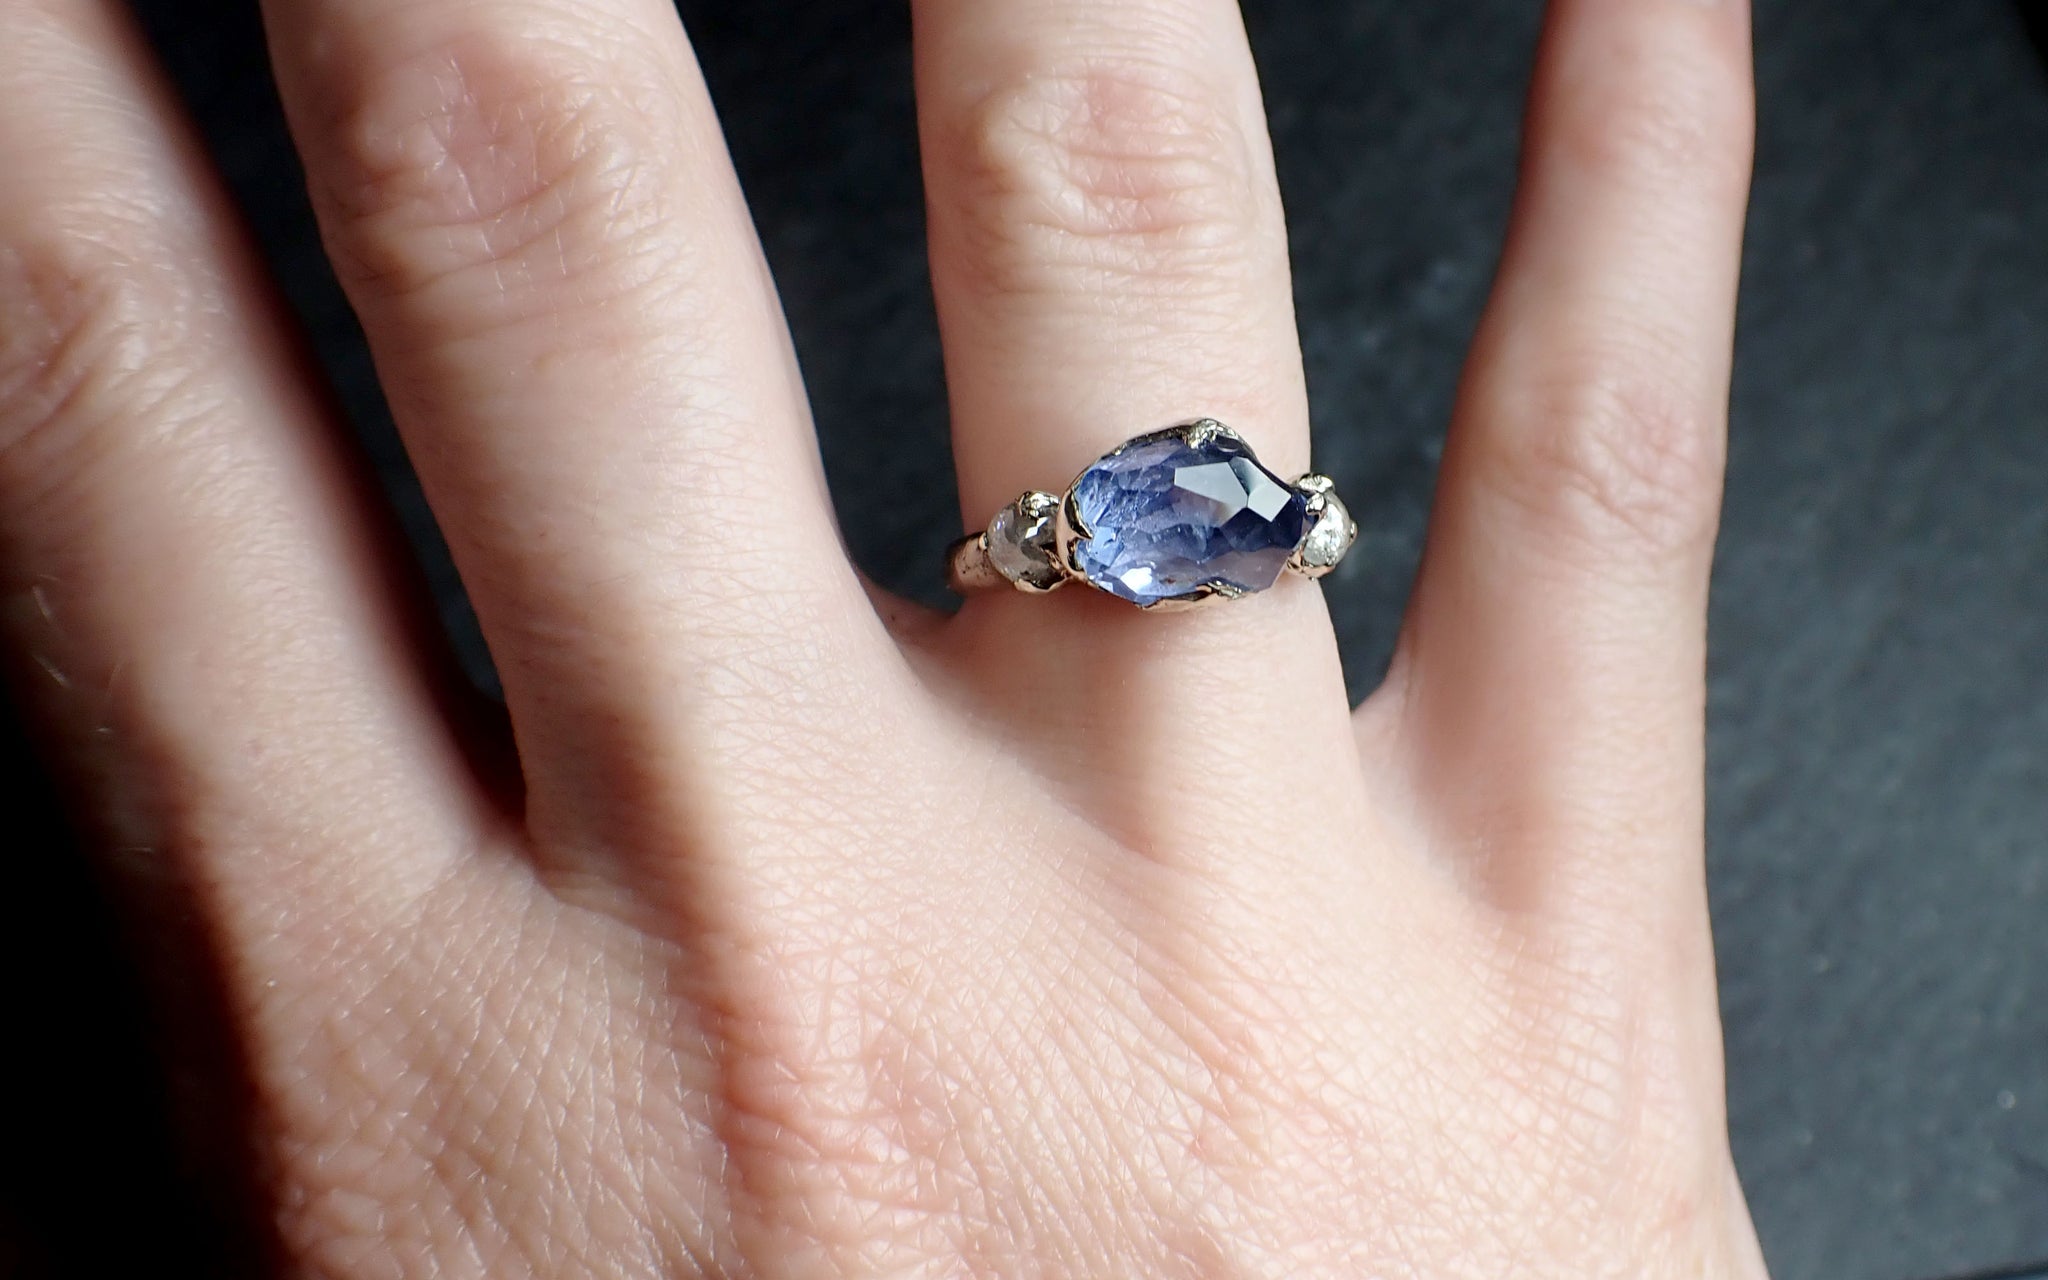 partially faceted blue montana sapphire and fancy diamonds 18k white gold engagement wedding ring custom gemstone ring multi stone ring 2504 Alternative Engagement